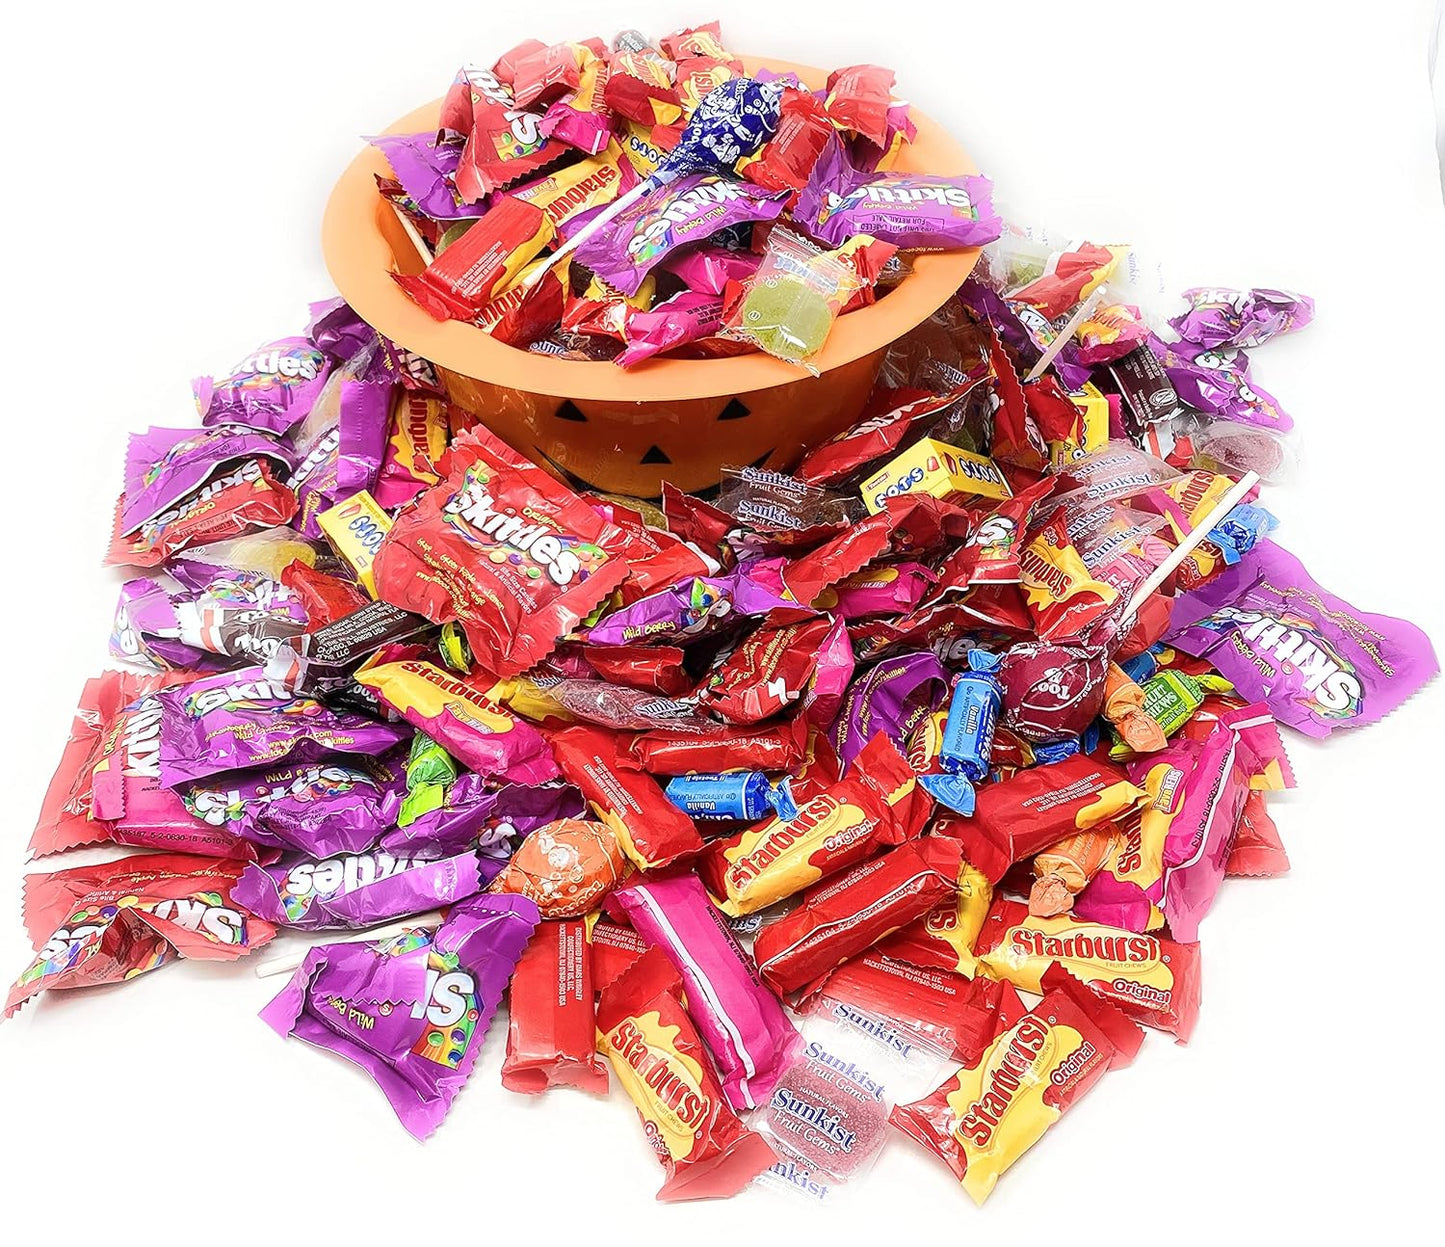 Assorted American Candy Classics Over 13 Favorite Flavors Skittles, Tootsies, Starburst, Fruit Gems Gummy 6.6Lb 340+pcs (106 Oz)